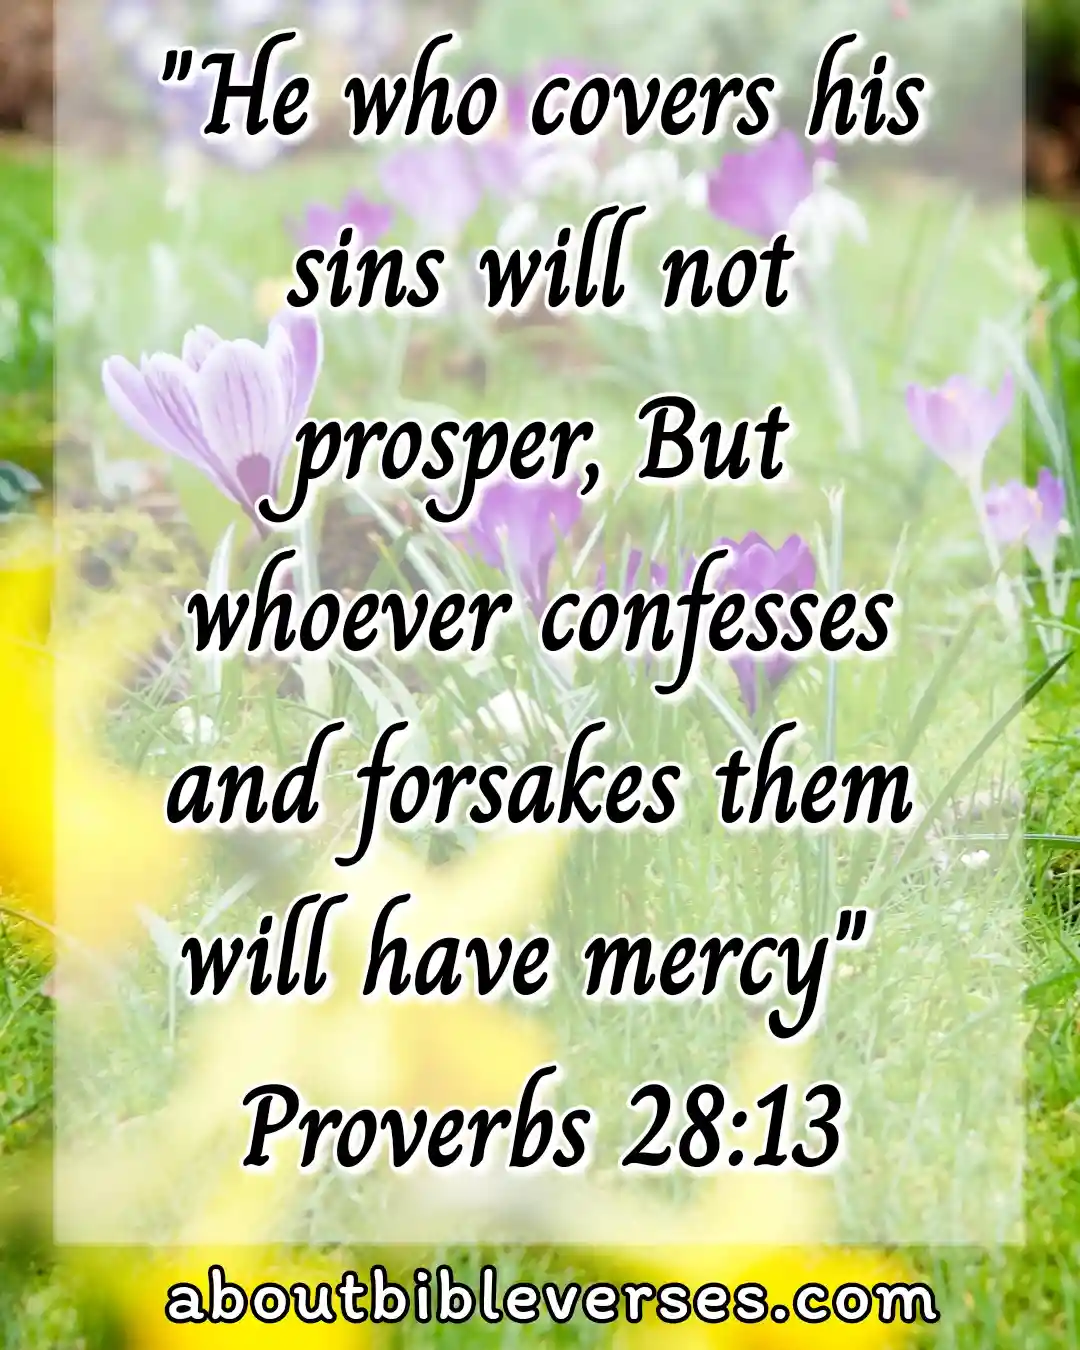 Bible Verses About Forgiveness of sins (Proverbs 28:13)